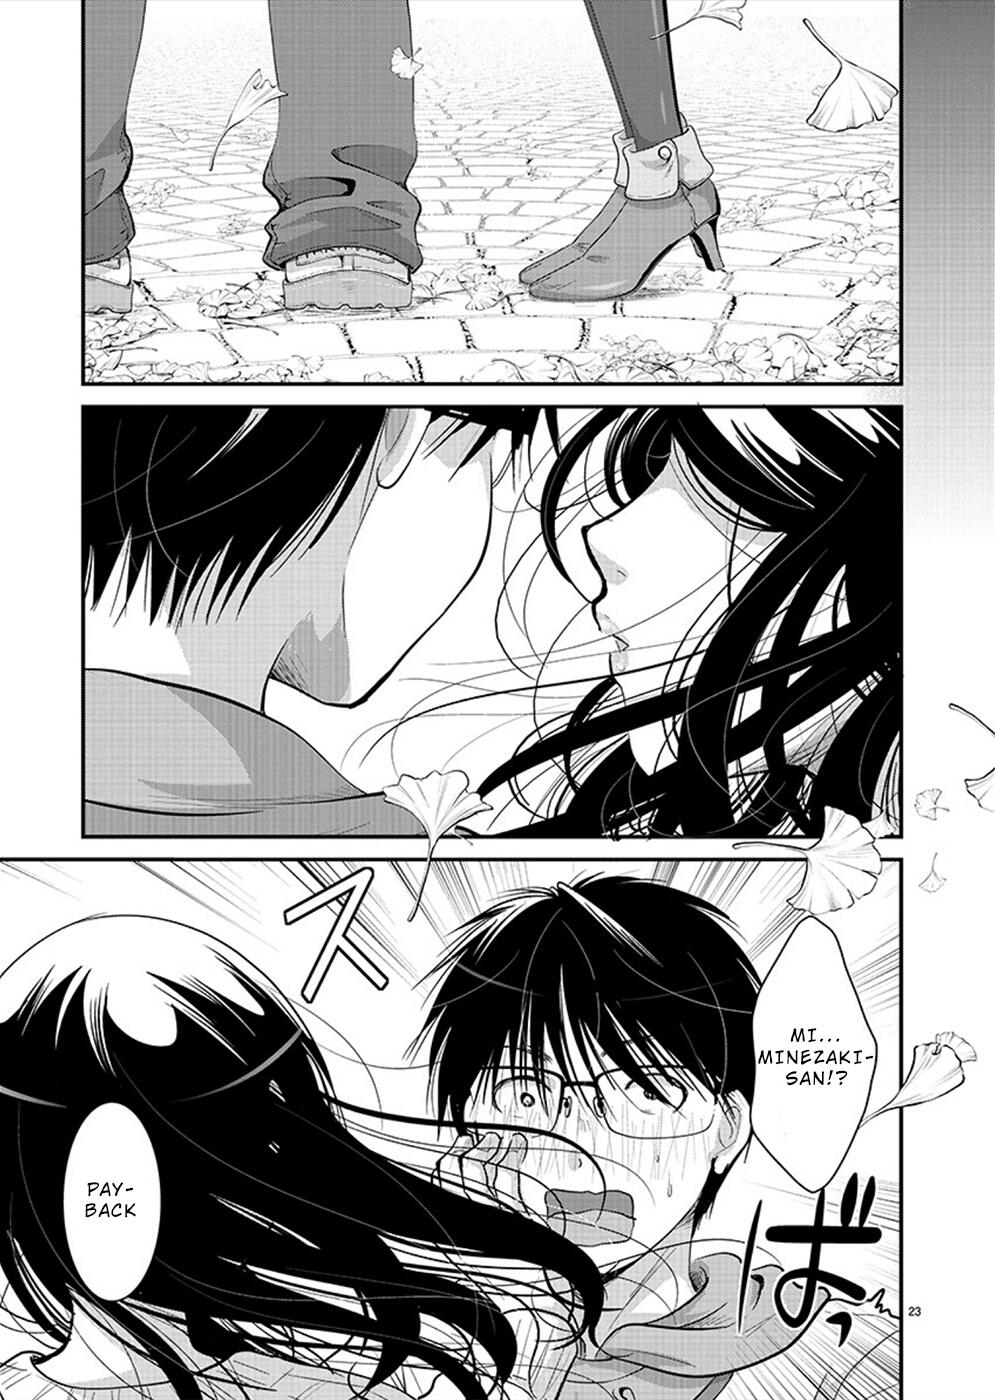 The Unattainable Flower's Twisted Bloom Chapter 24 page 24 - Mangakakalots.com